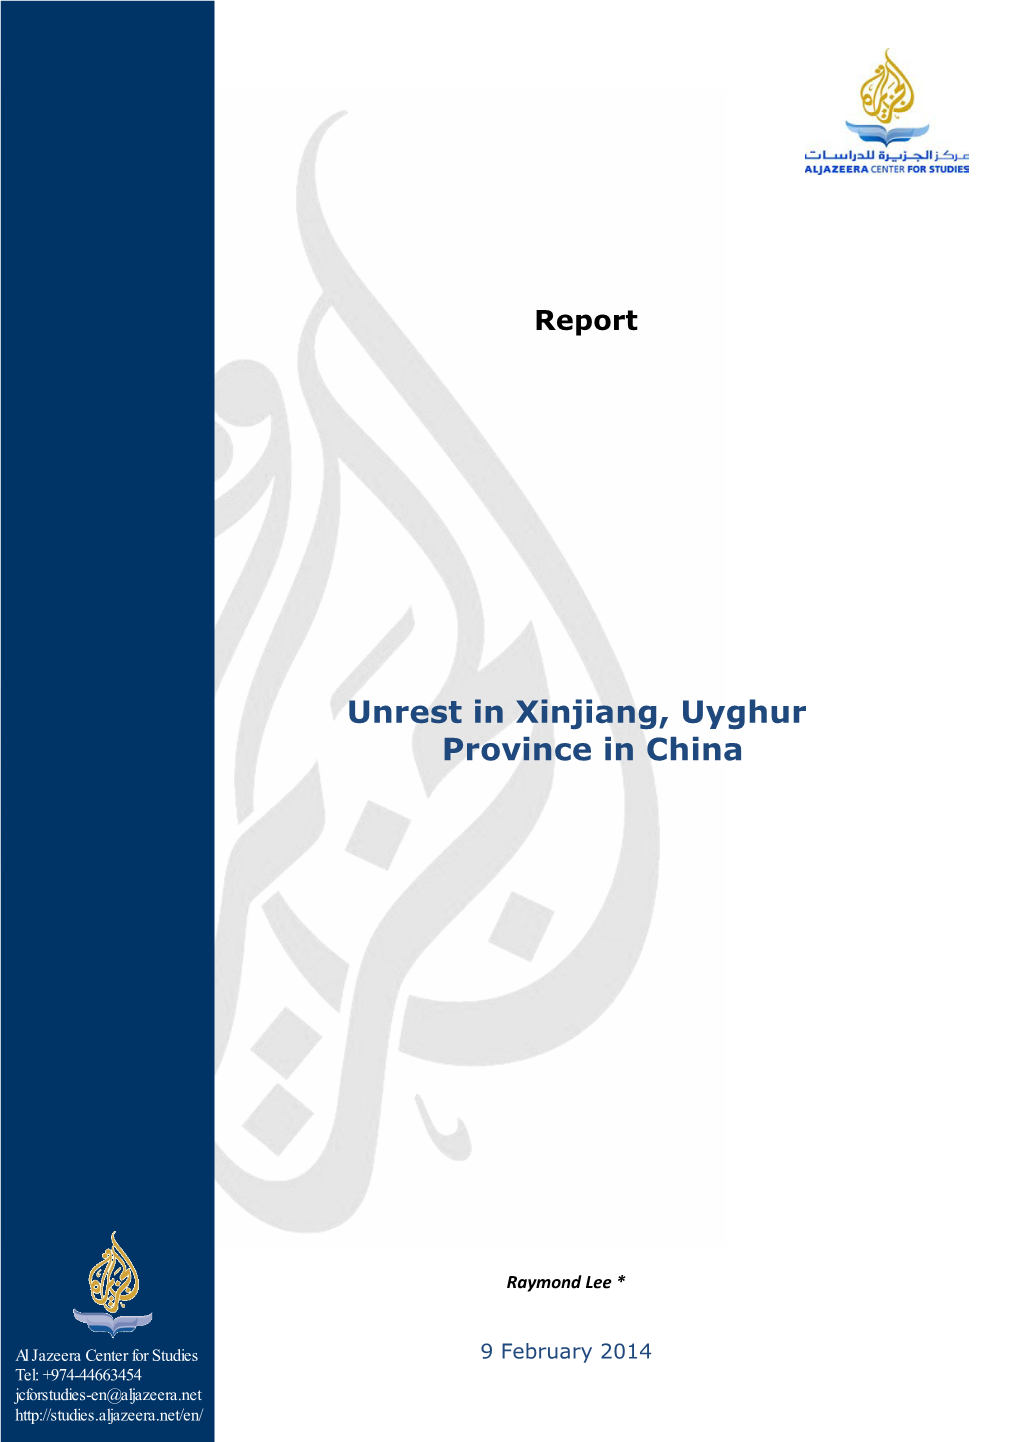 Unrest in Xinjiang, Uyghur Province in China